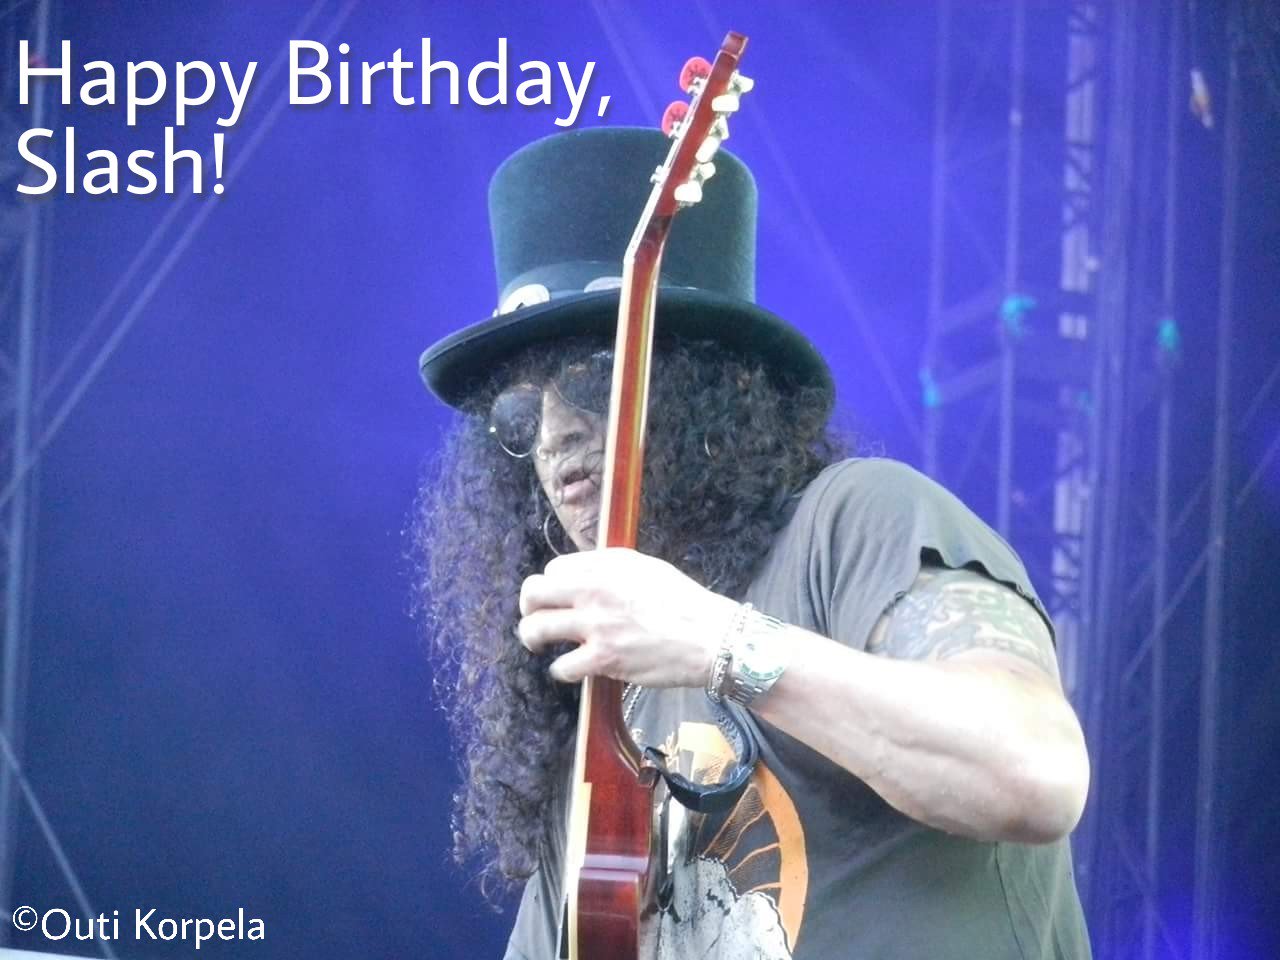 Happy Birthday to the one and only Slash! 